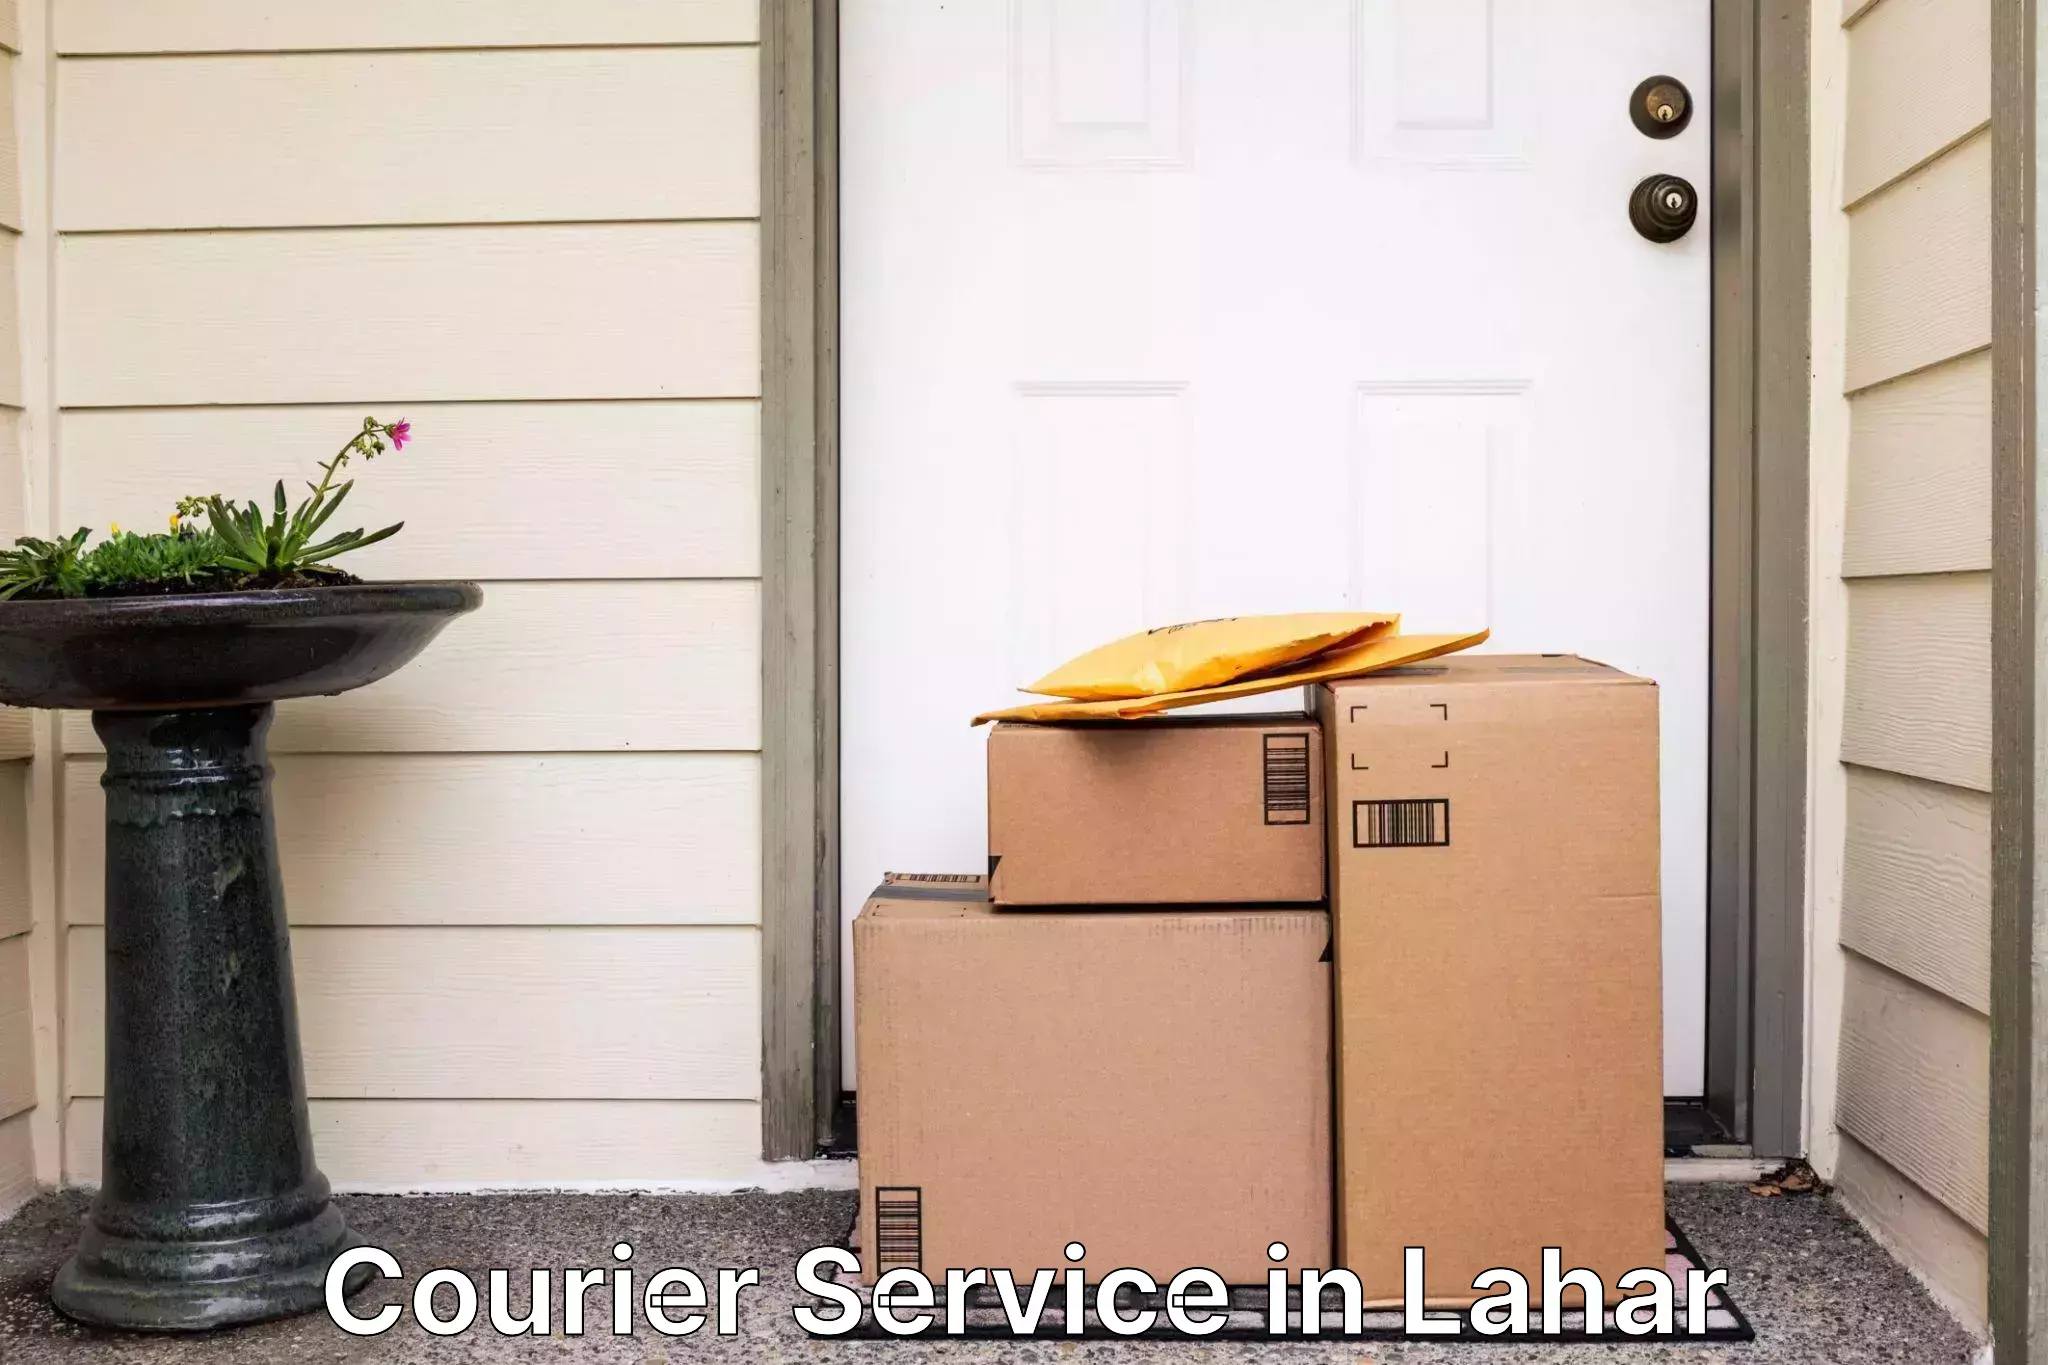 Round-the-clock parcel delivery in Lahar